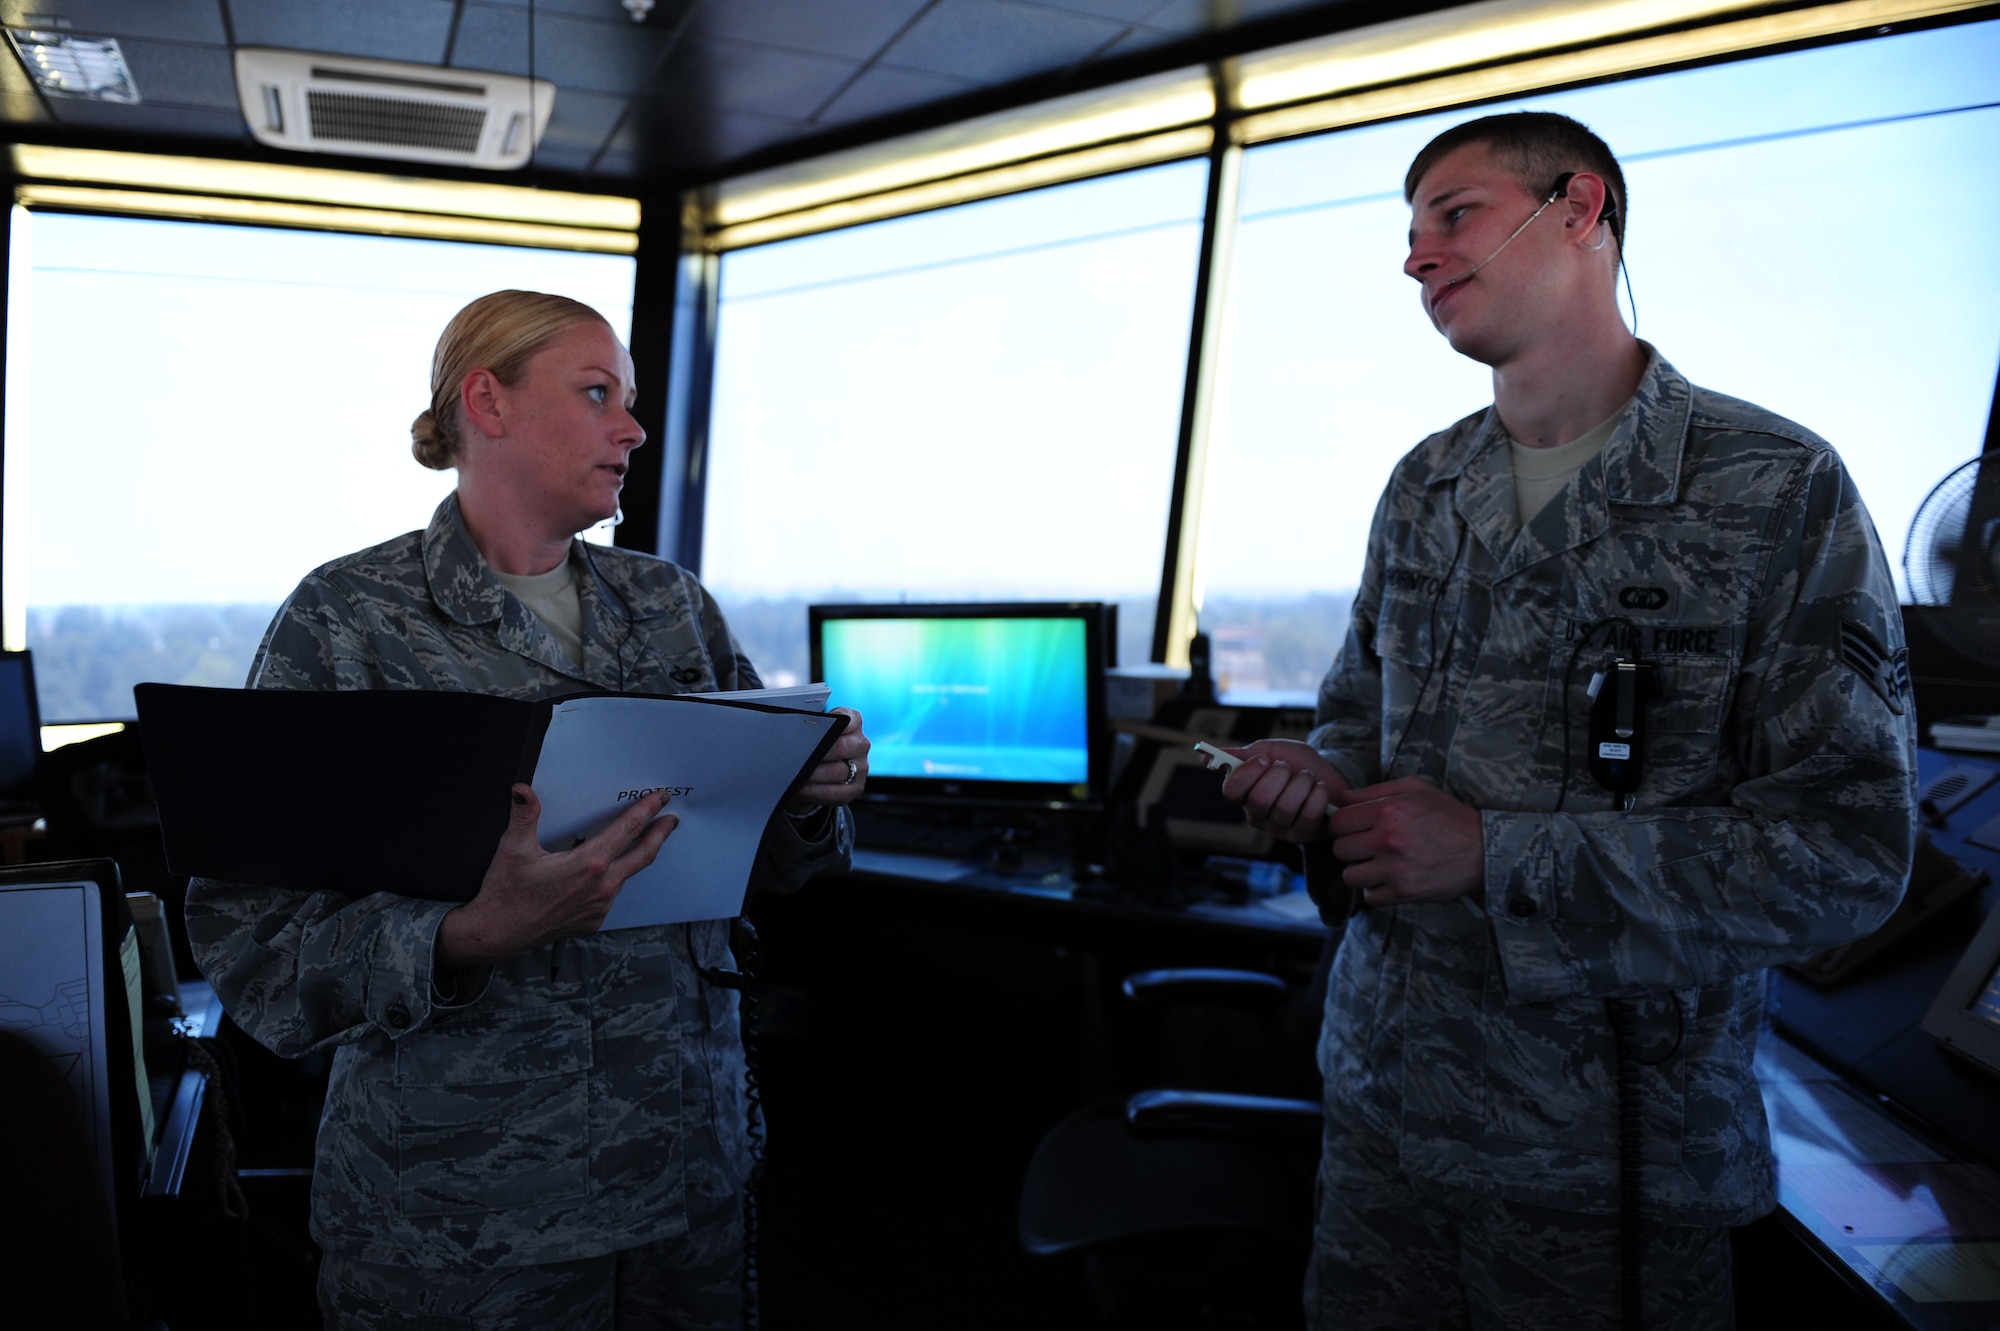 Tech. Sgt. Jennifer Rowles, 39th Operations Squadron tower watch supervisor, and Senior Airman Matthew Thornton, 39th OS air traffic control journeyman, discuss air traffic control procedures July 27, 2011, at Incirlik Air Base, Turkey. Air traffic controllers must take a monthly proficiency test to ensure they are knowledgeable about all rules and regulations. (U.S. Air Force photo by Senior Airman Anthony Sanchelli/Released)